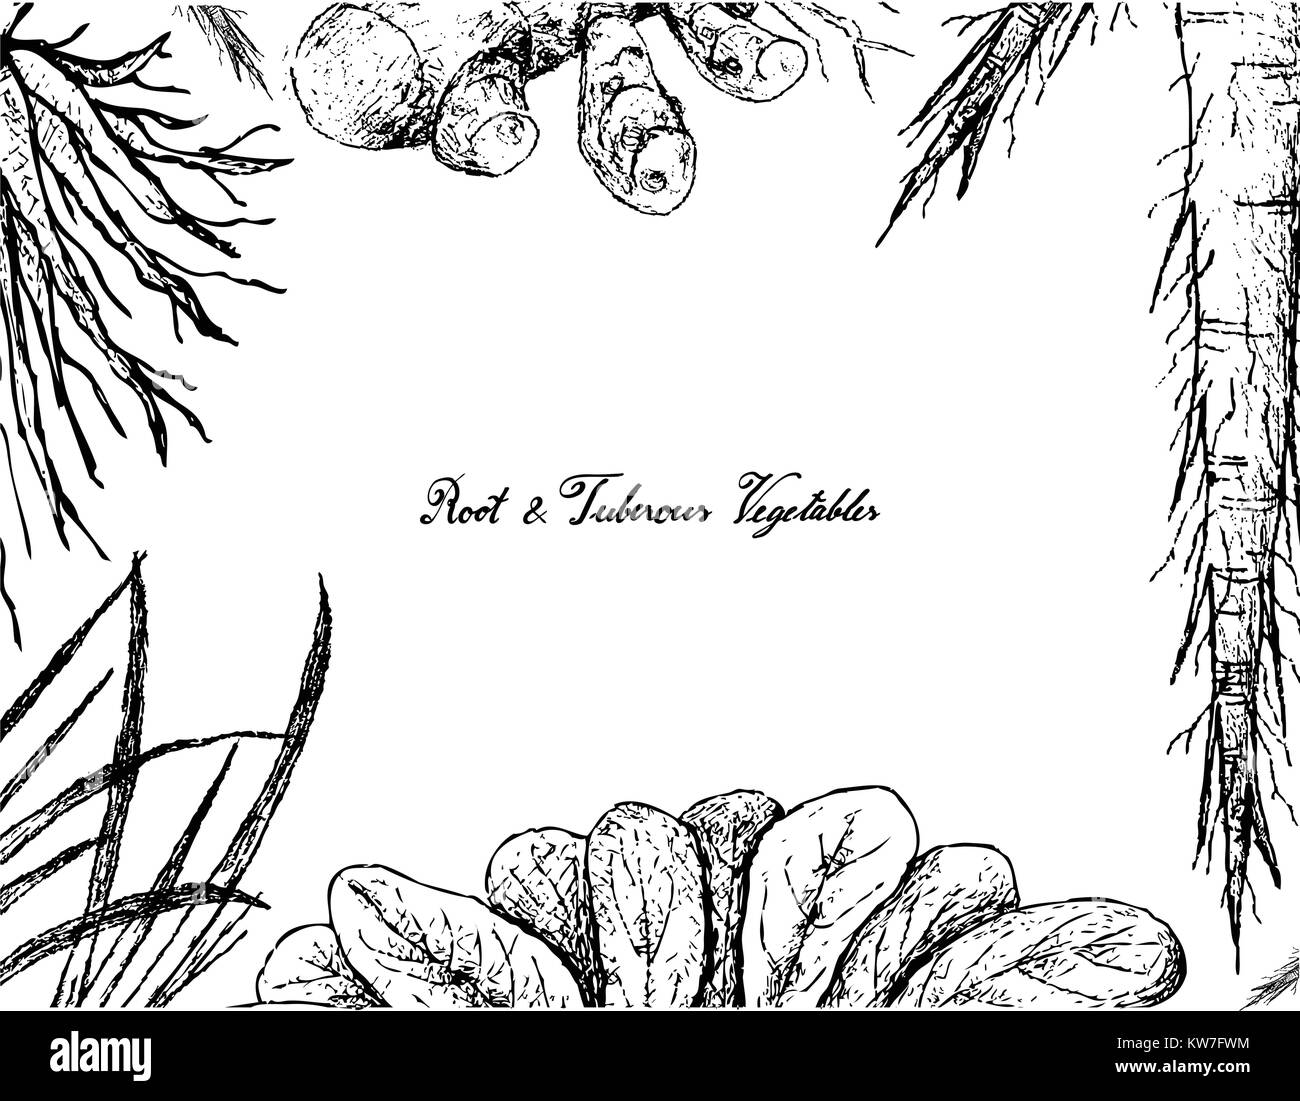 Root and Tuberous Vegetables, Illustration Frame of Hand Drawn Sketch of Turmeric, Skirret, Salsify Plants on White Background. Stock Vector